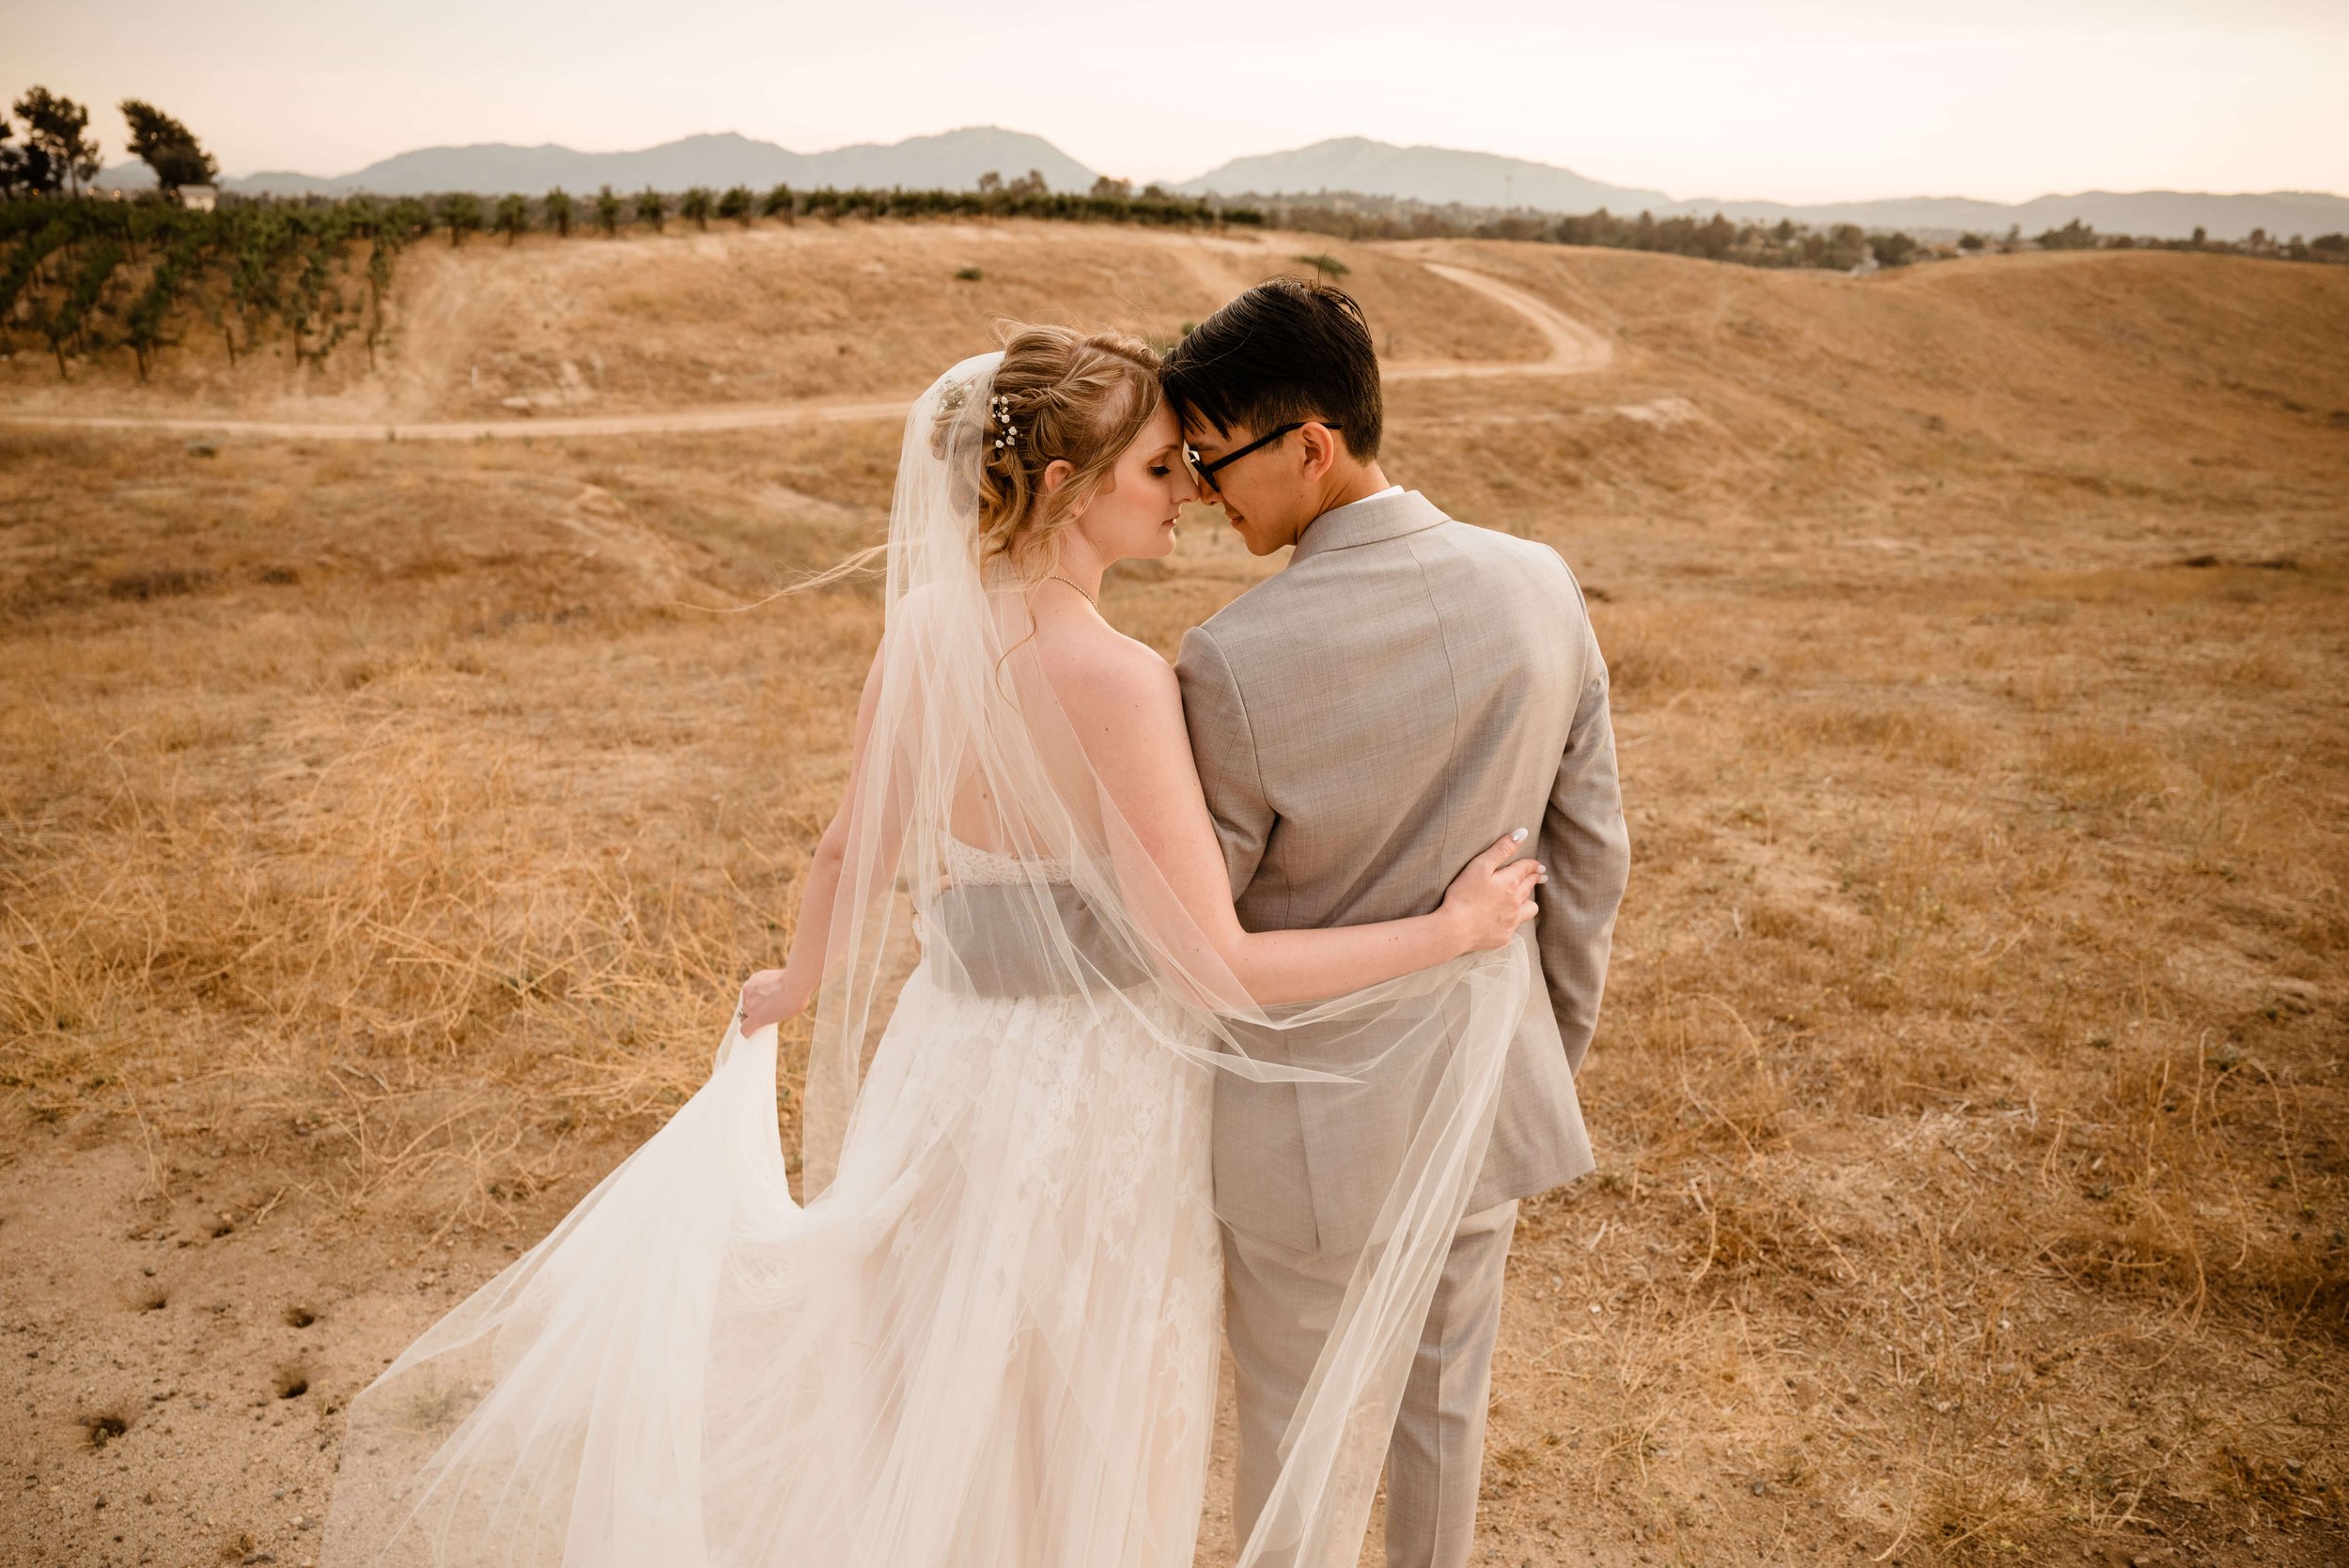 Desert Elopement photographed by J. Andrade Visual Arts